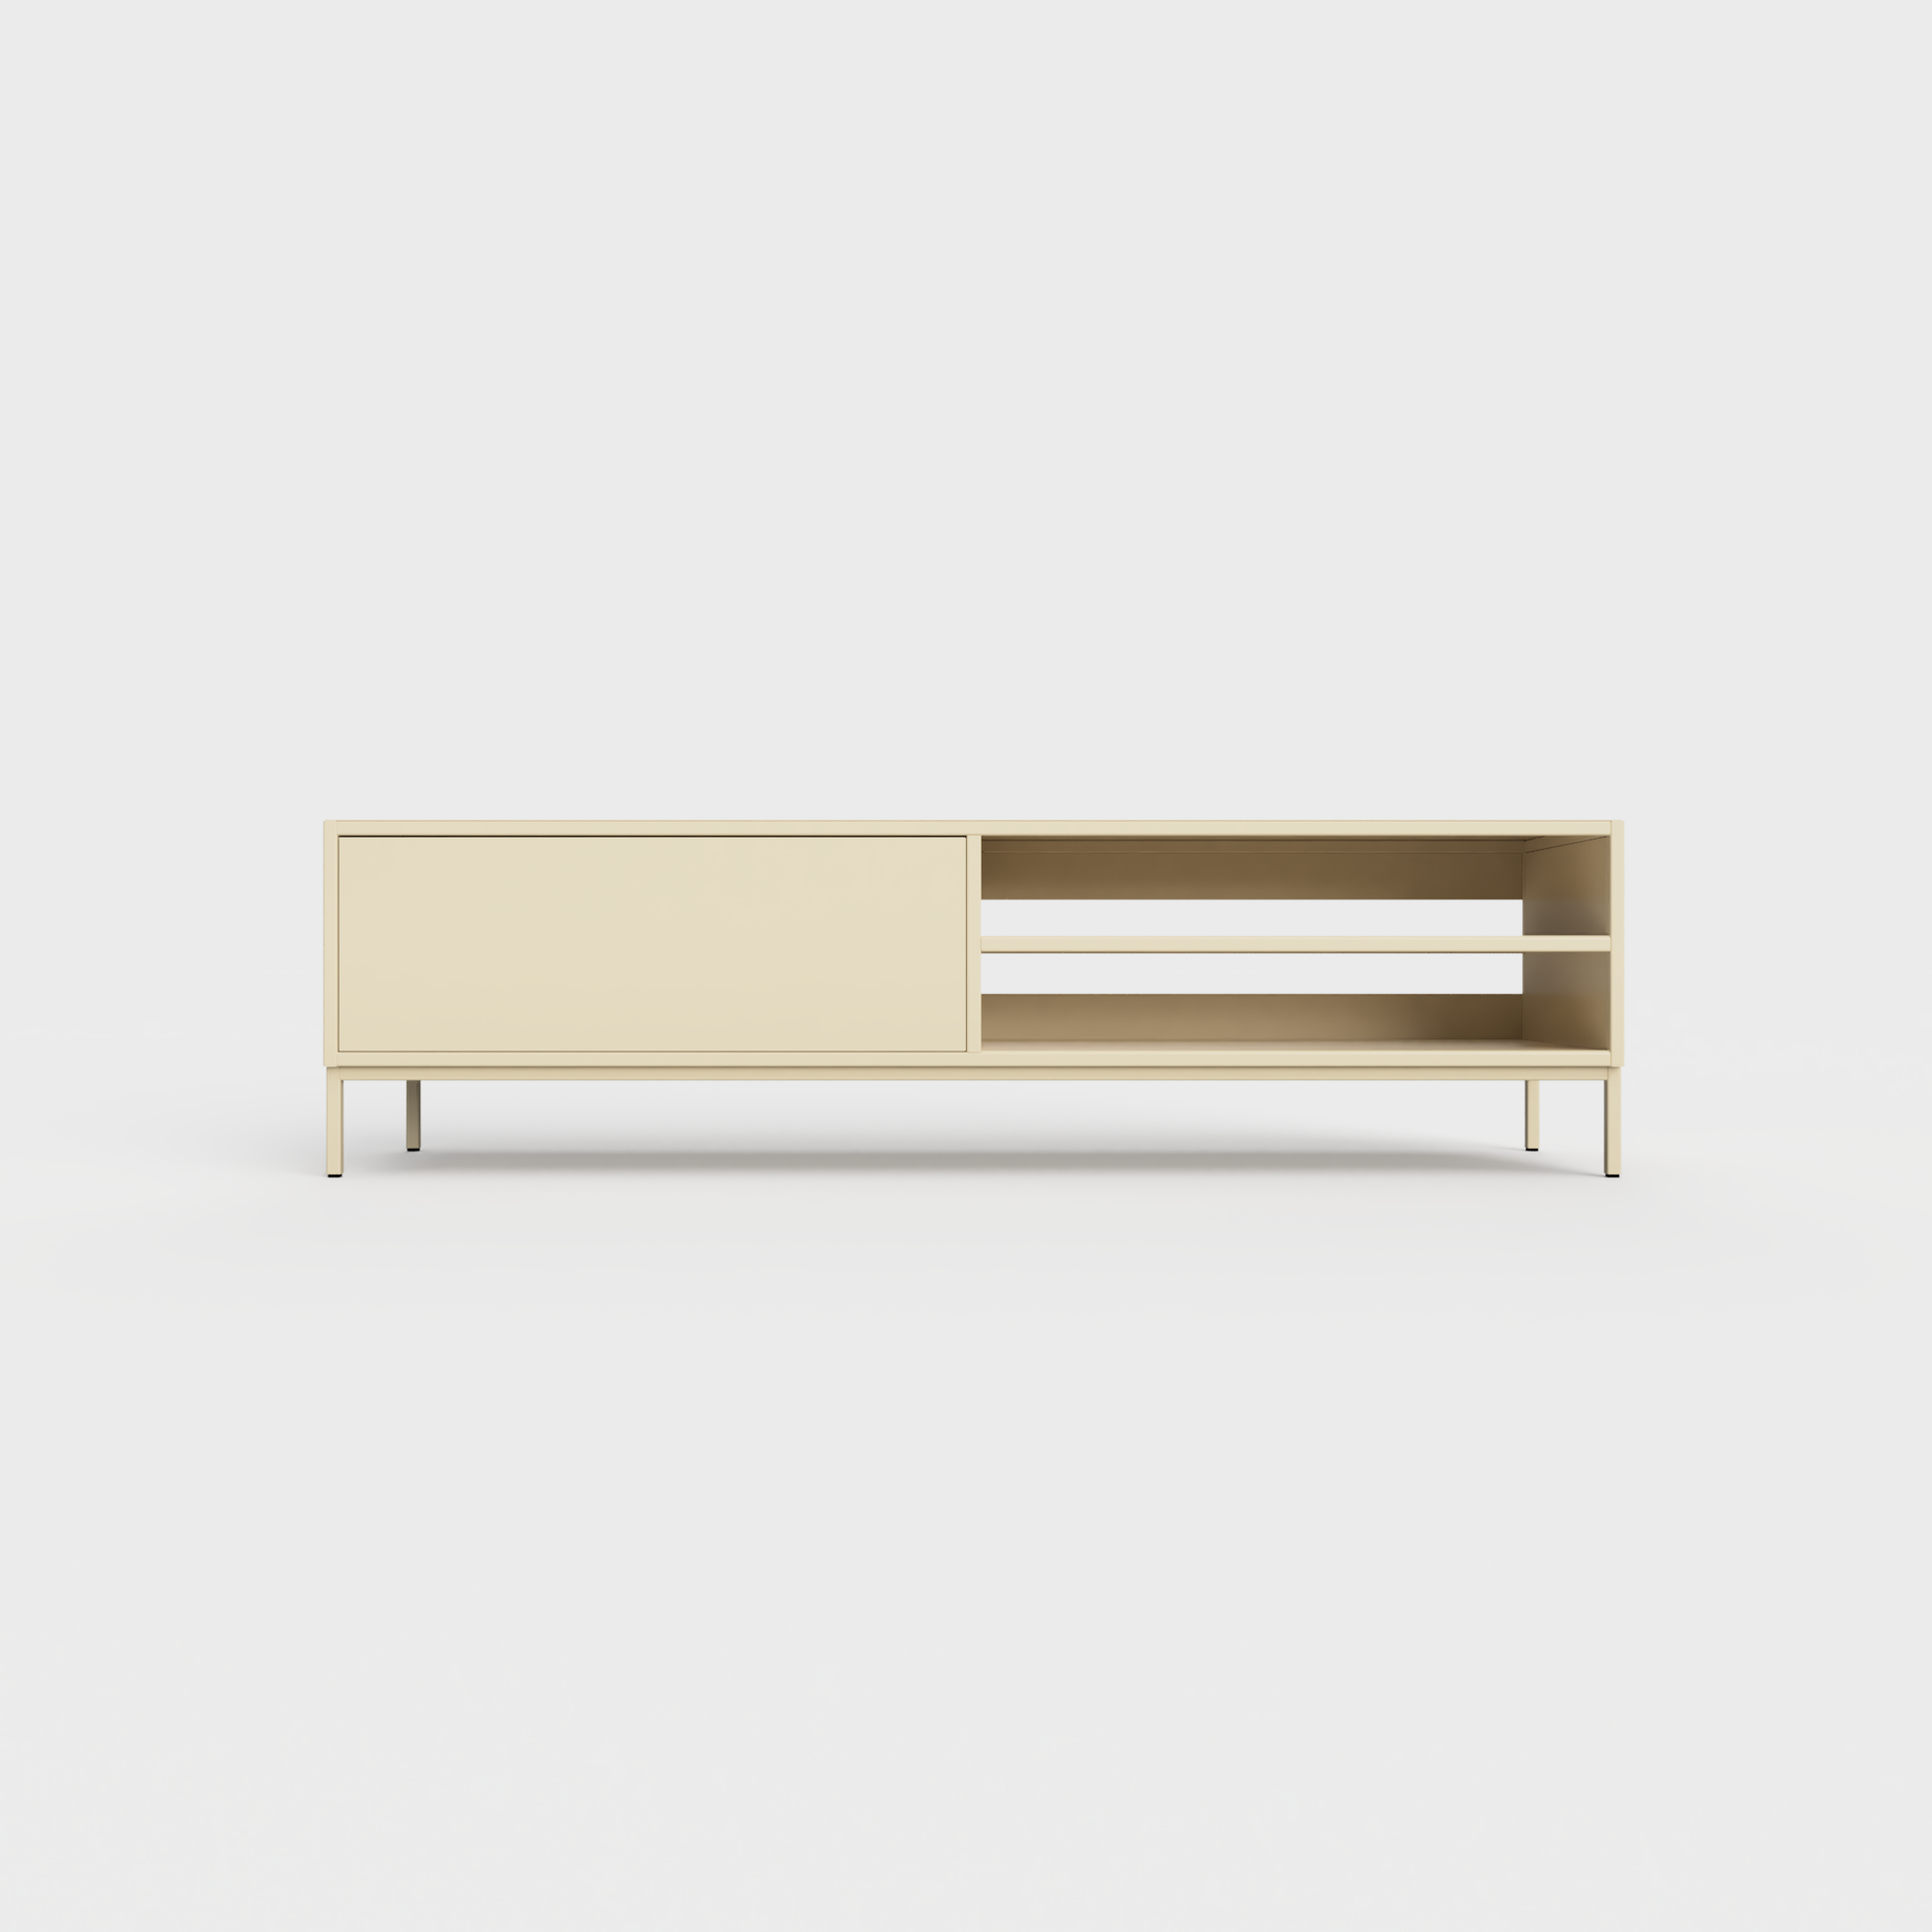 Prunus 02 Lowboard in Sand color, powder-coated steel, elegant and modern piece of furniture for your living room